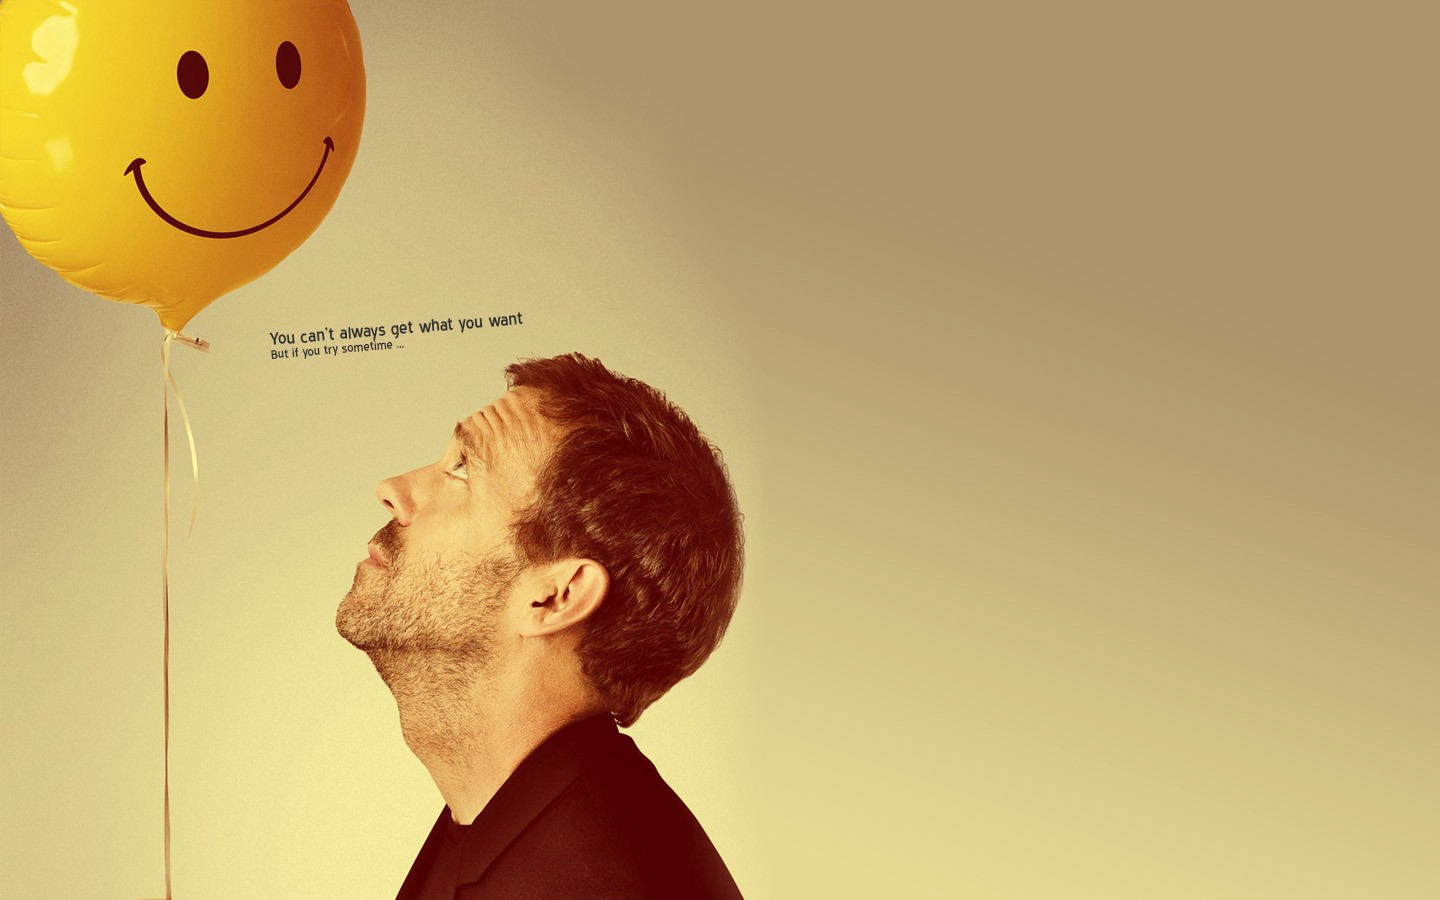 House M D Hugh Laurie Balloon Smiley Actor Men Looking Up 1440x900